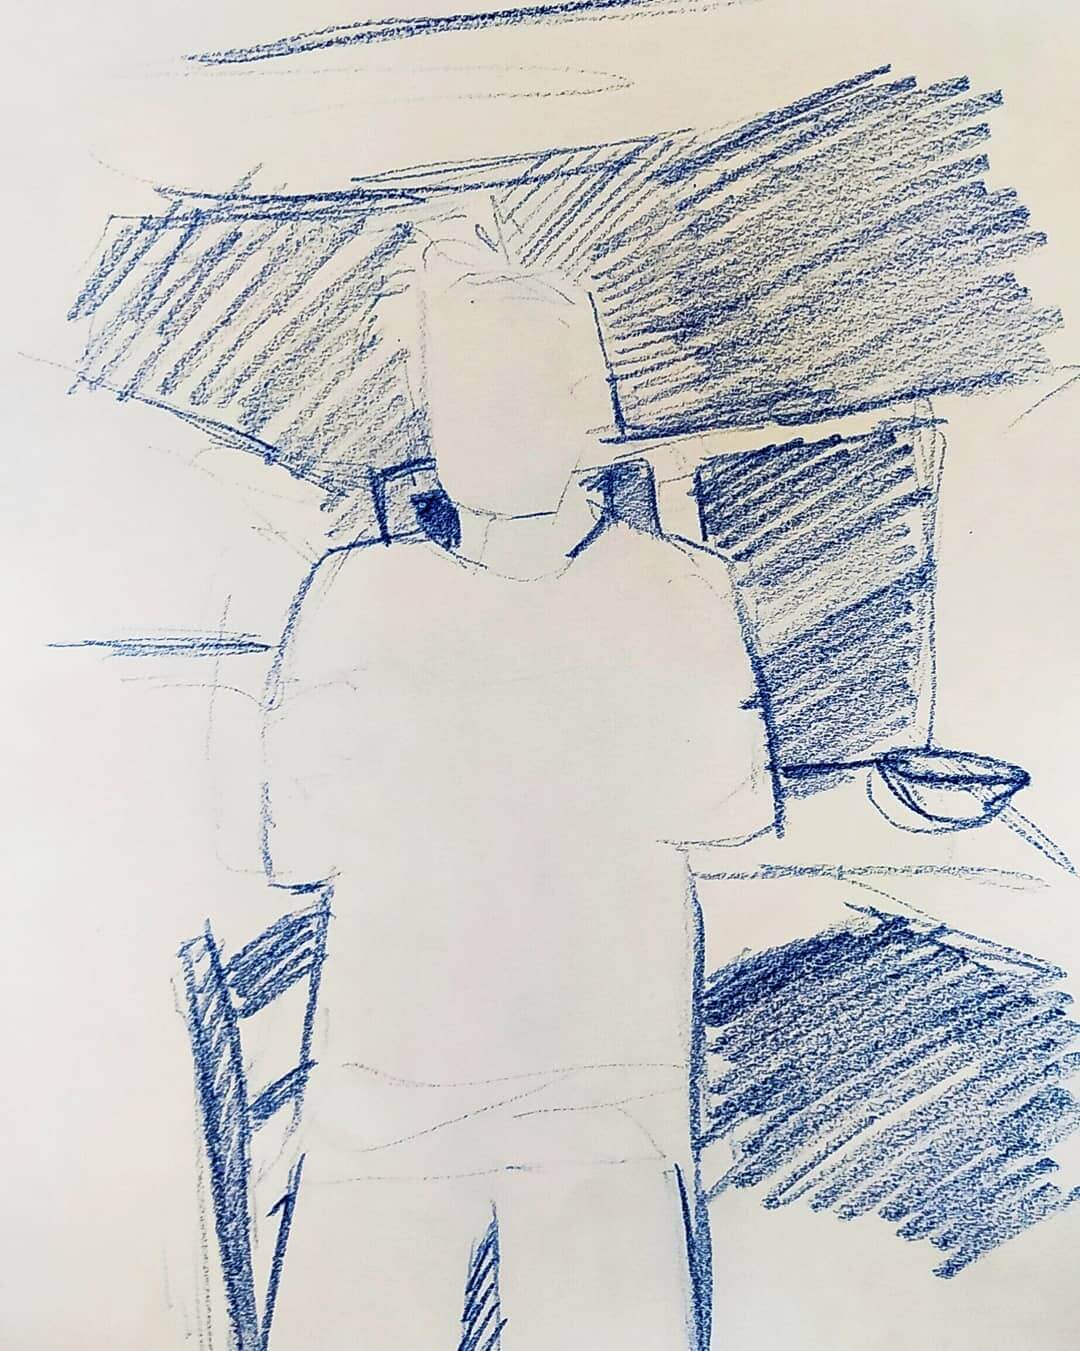 2. Negative space drawing of a person standing in a kitchen with blue shading.